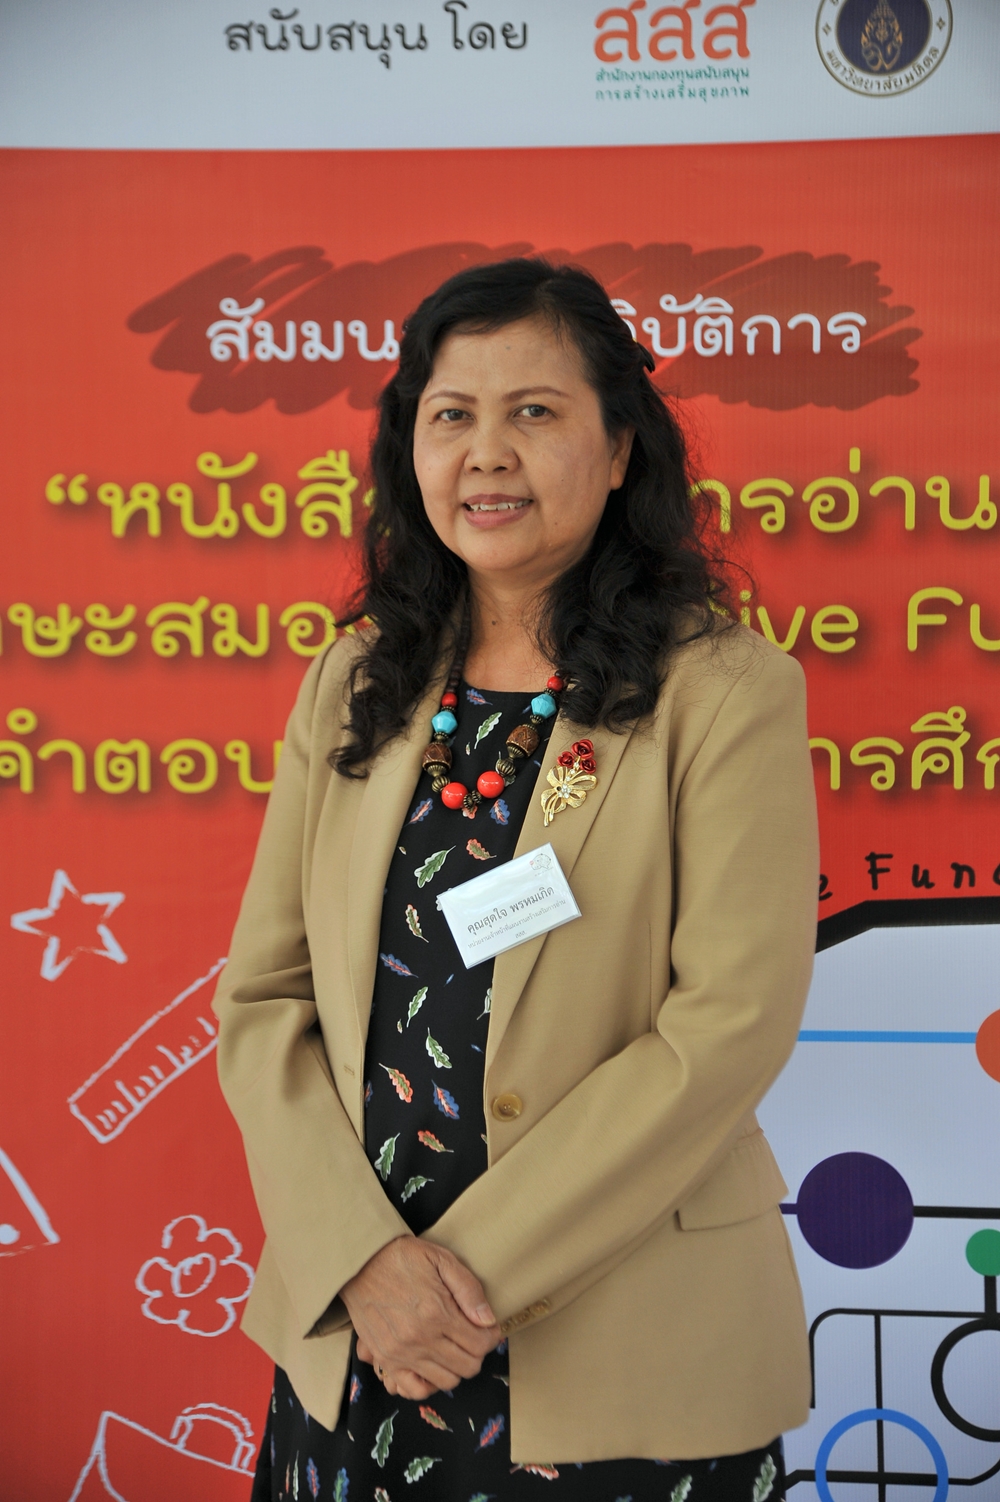 Executive Functions (EF): For the Future of 21st Century Thai Kids